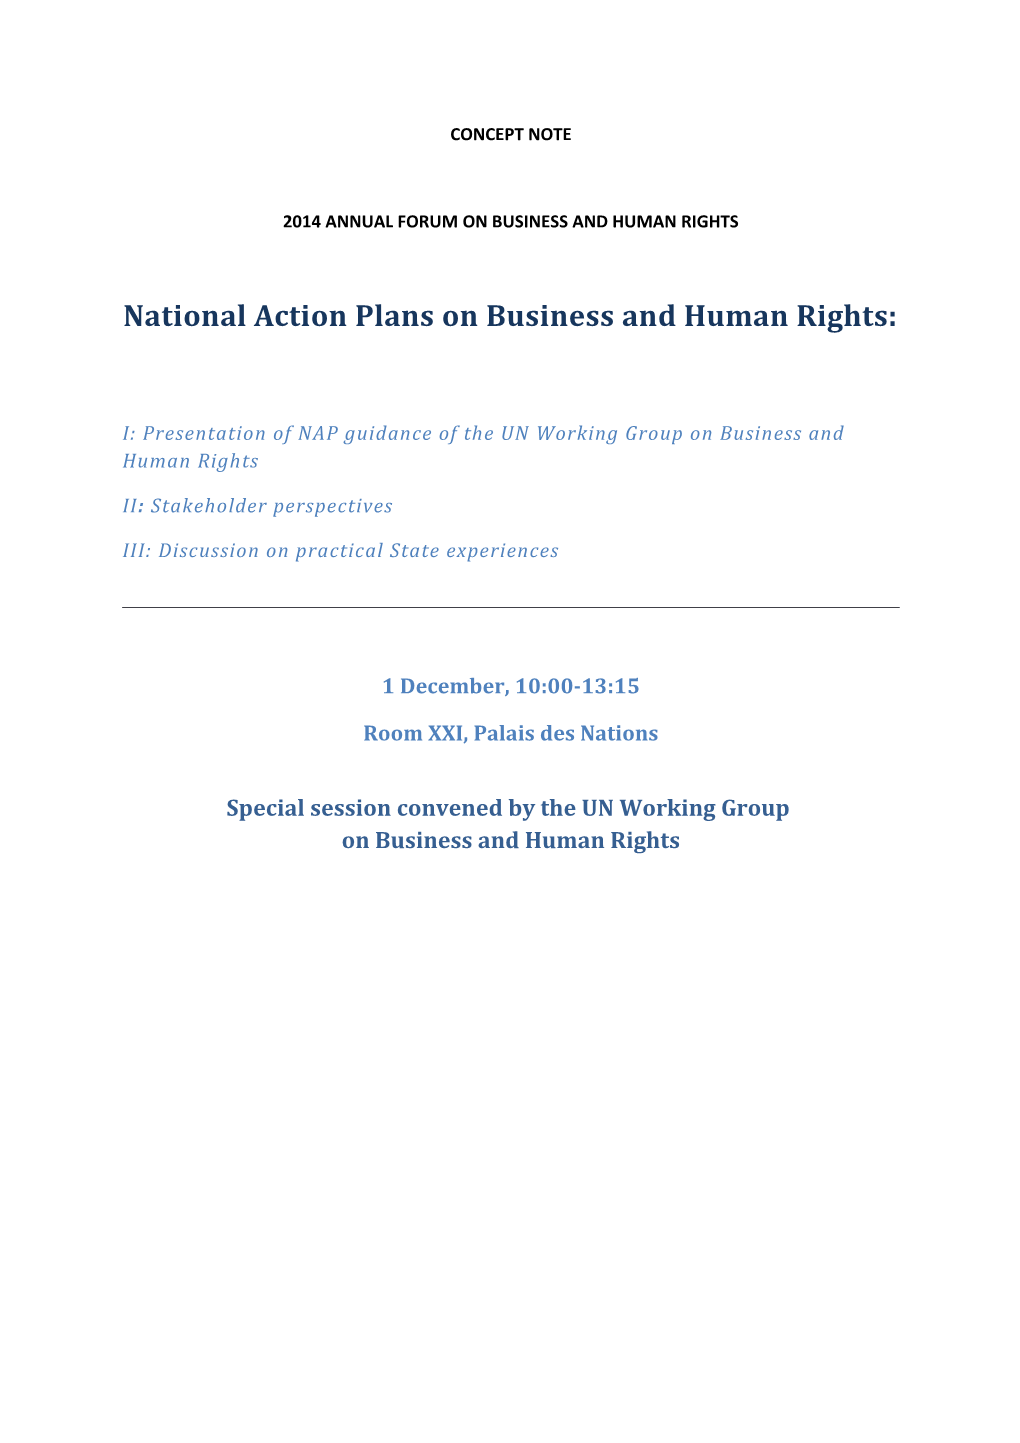 2014 Annual Forum on Business and Human Rights